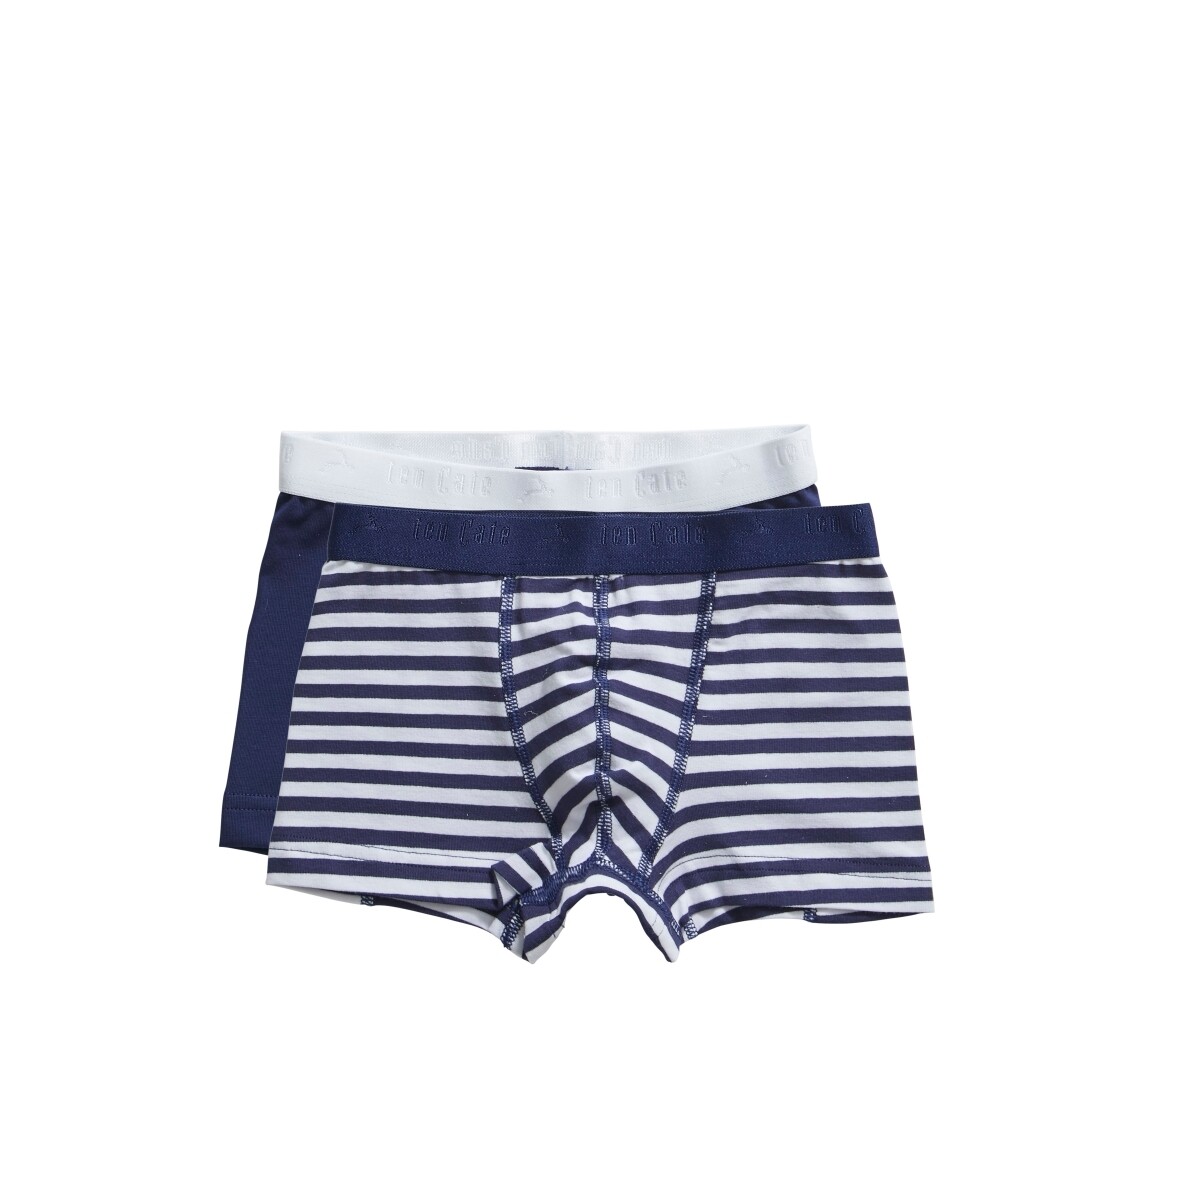 Ten Cate 31122 stripe and medieval